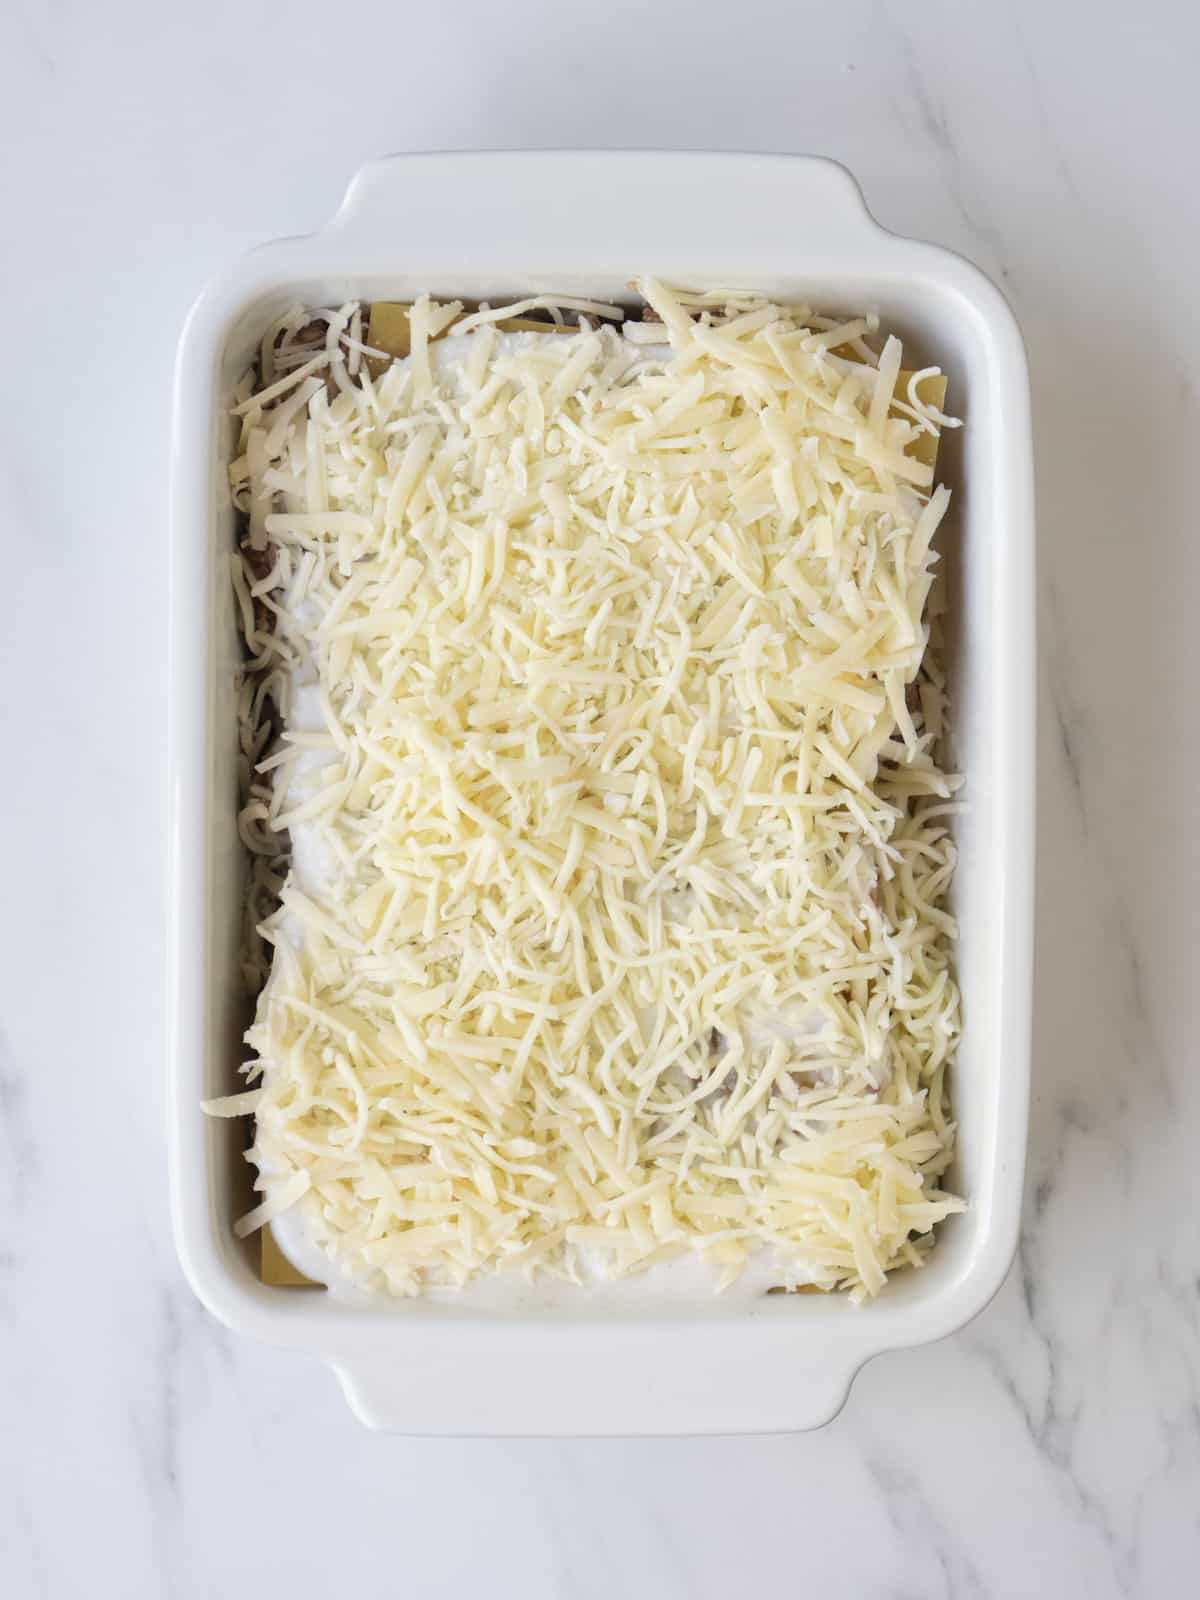 A white rectangular baking dish with uncooked lasagna assembled.